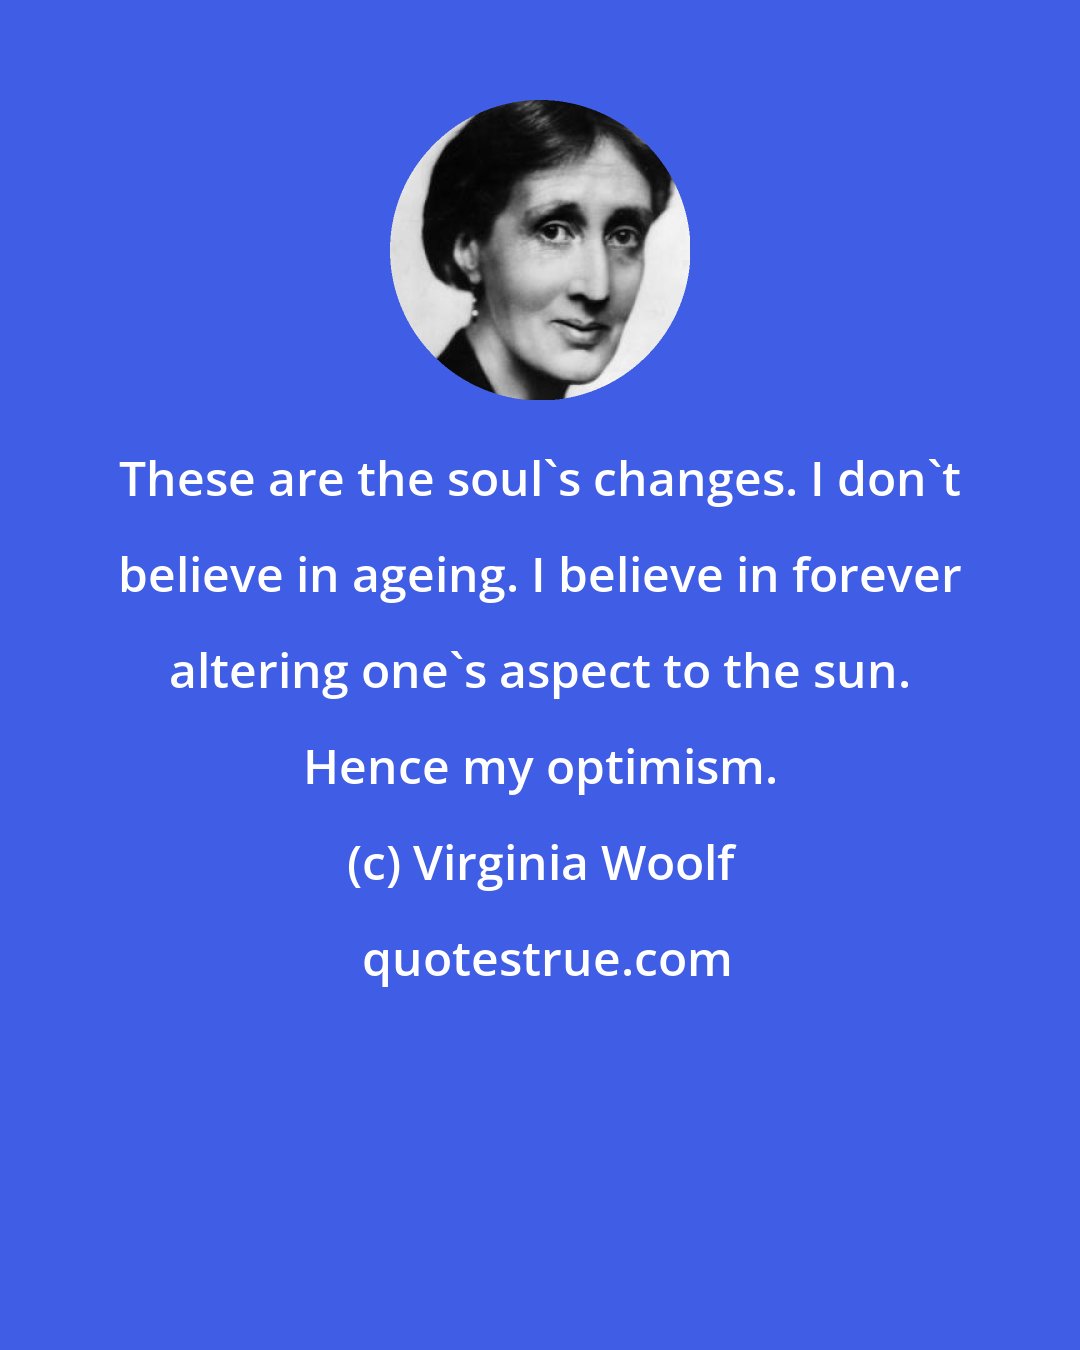 Virginia Woolf: These are the soul's changes. I don't believe in ageing. I believe in forever altering one's aspect to the sun. Hence my optimism.